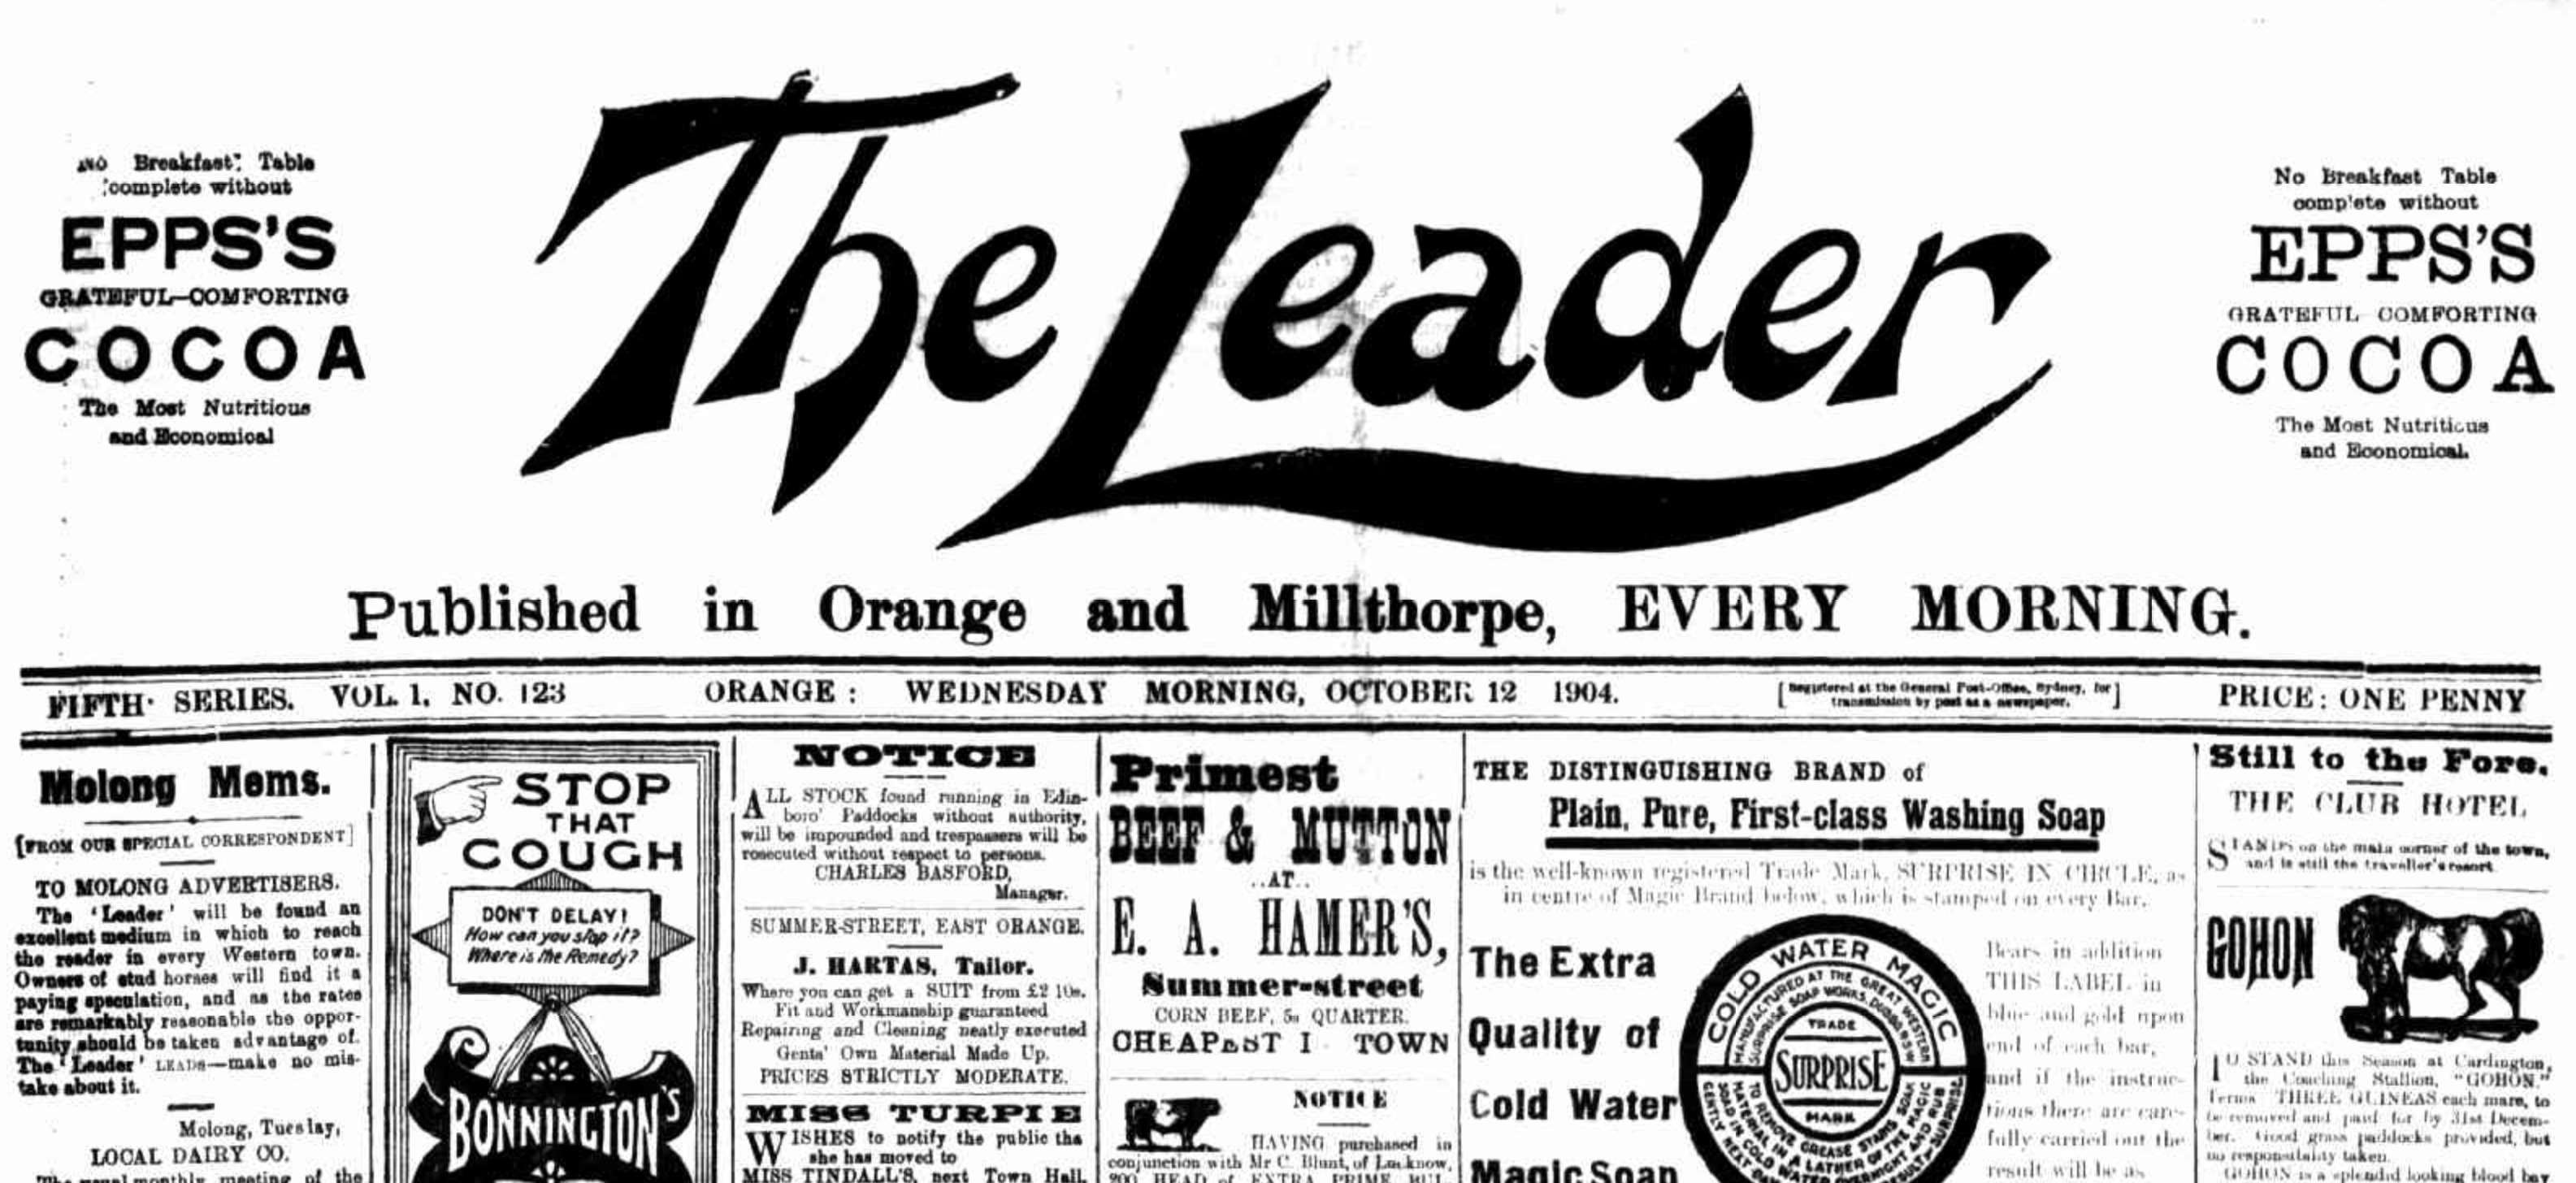 Front page of The Leader newspaper showing masthead and top articles